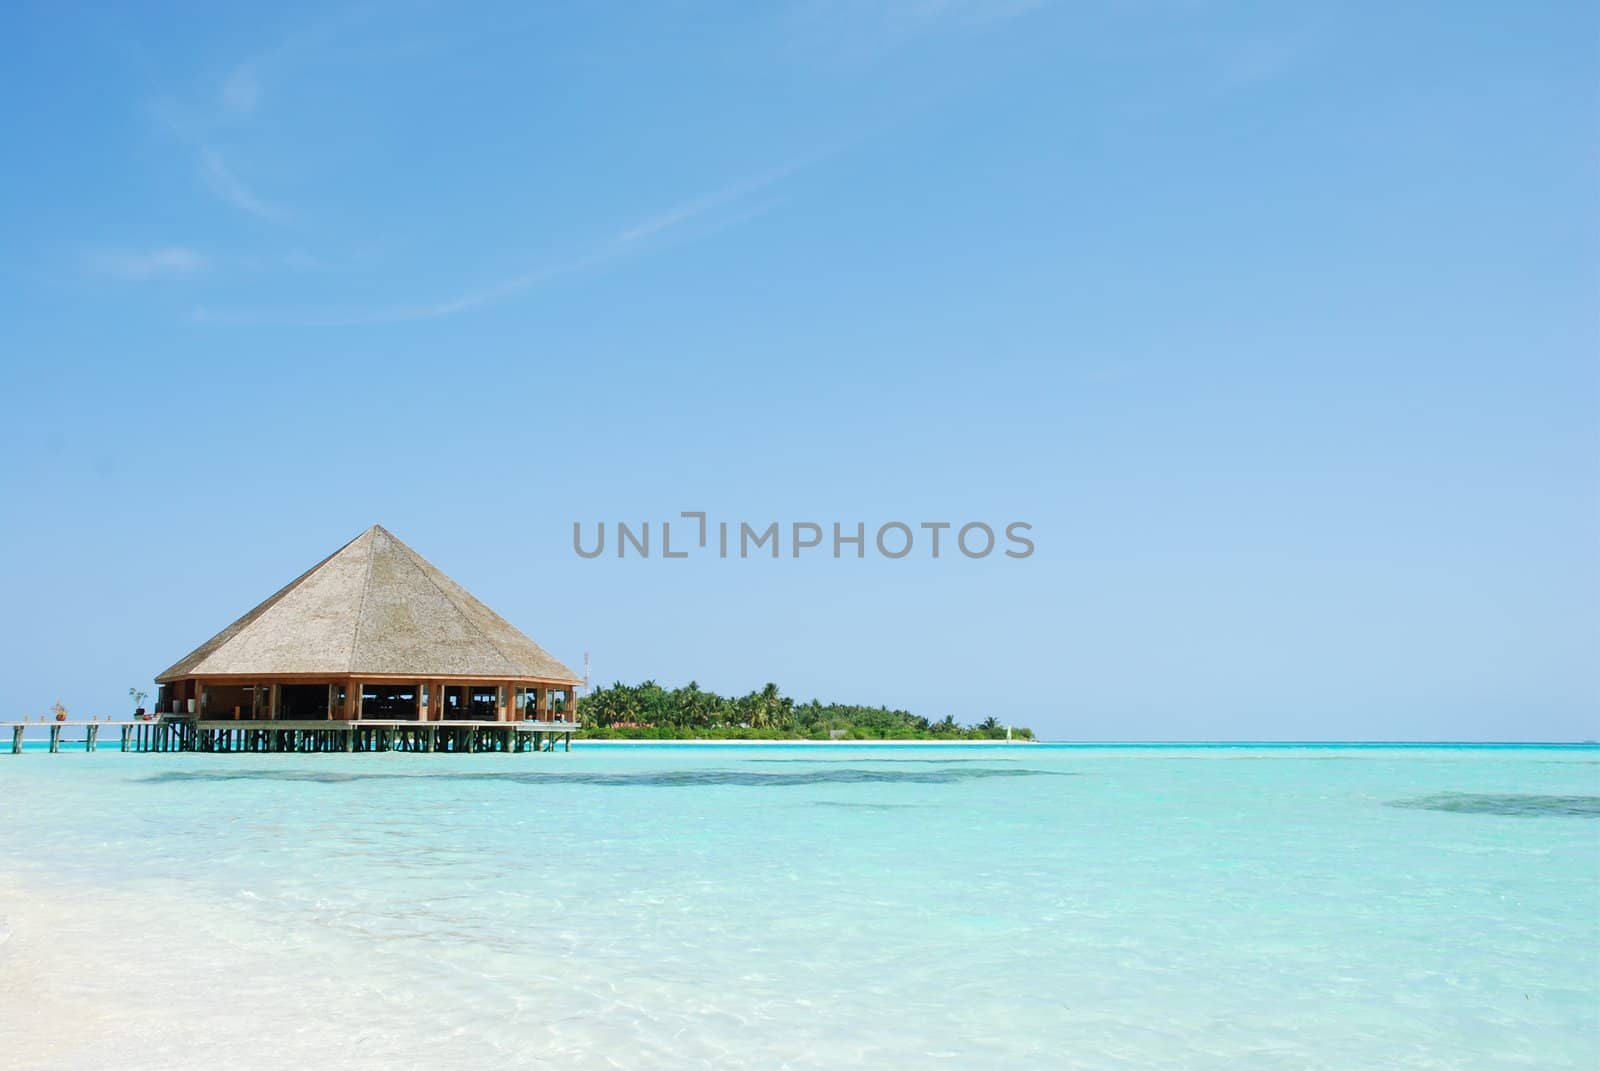 Bungalow's architecture and beach on a Maldivian Island by luissantos84